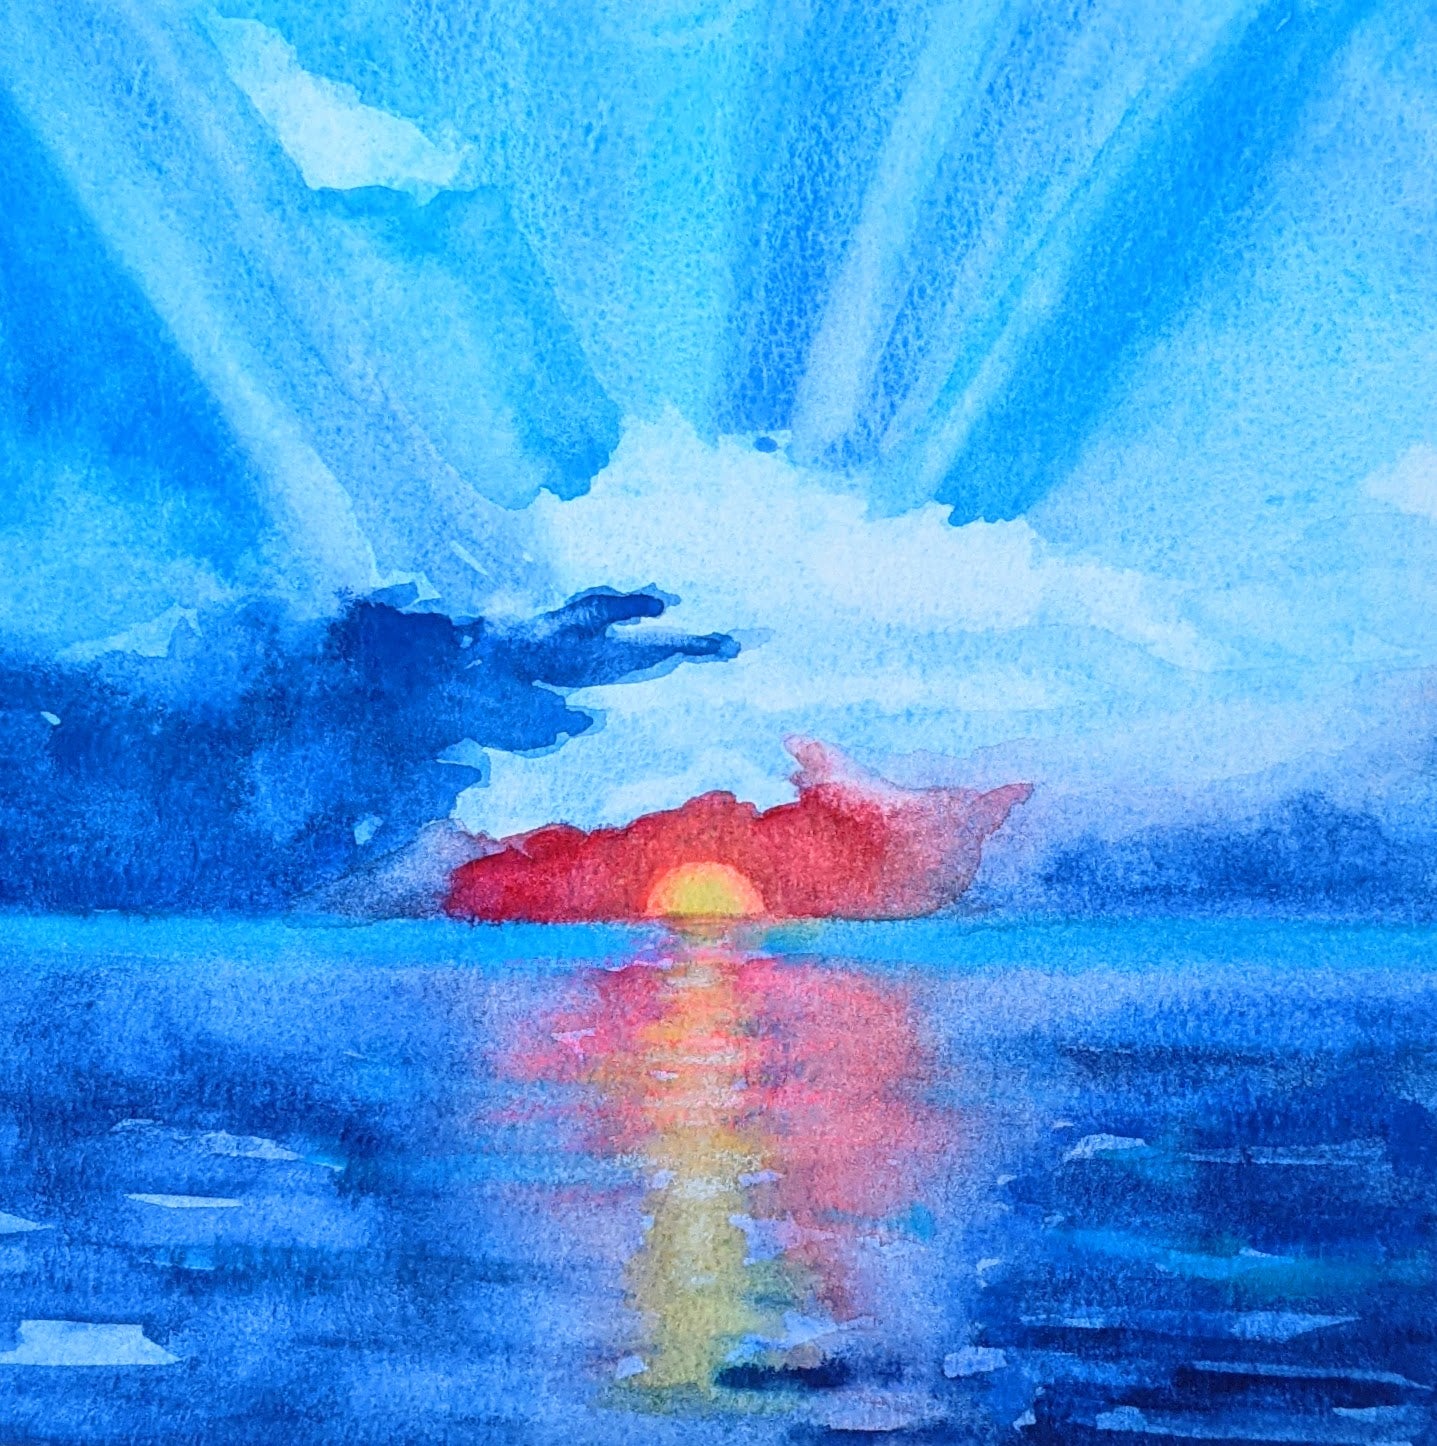 Another New Day watercolor painting on paper